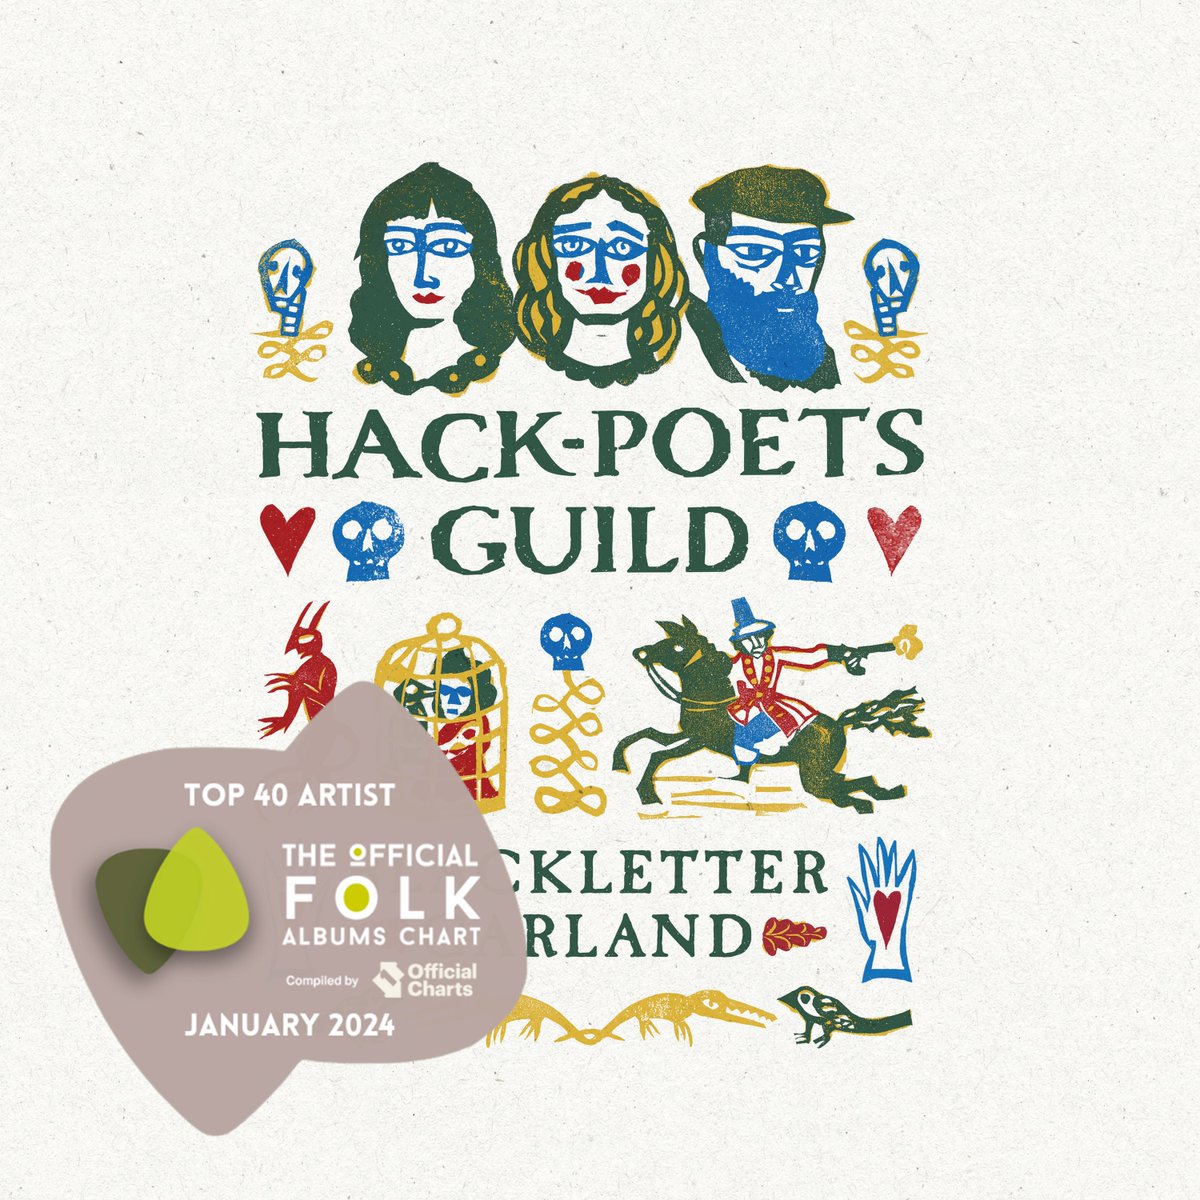 Gladdened by this re-entry for Black Letter Garland almost a year on - in The Official Folk Albums Chart compiled by the Official Charts Company in partnership with @englishfolkexpo @folkonfoot Buy: olirecords.com/shop/hack-poet…